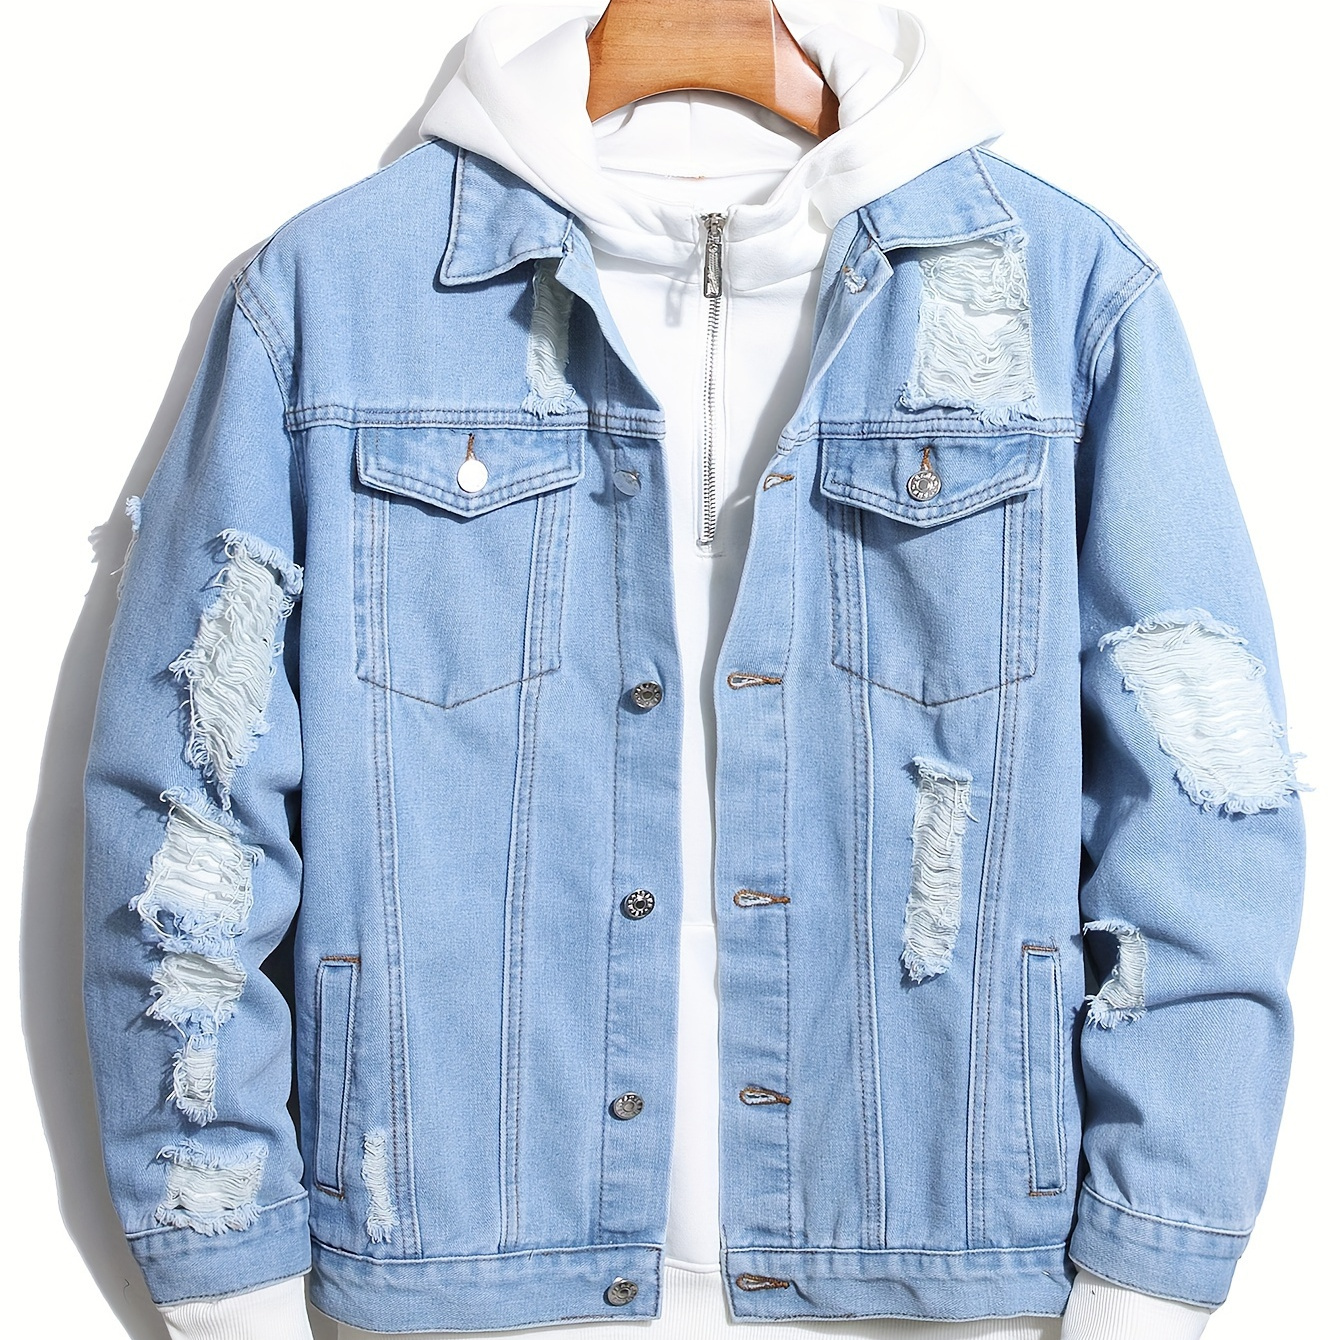 

Men's Casual Ripped Denim Jacket, Chic Street Style Chest Pocket Button Up Coat